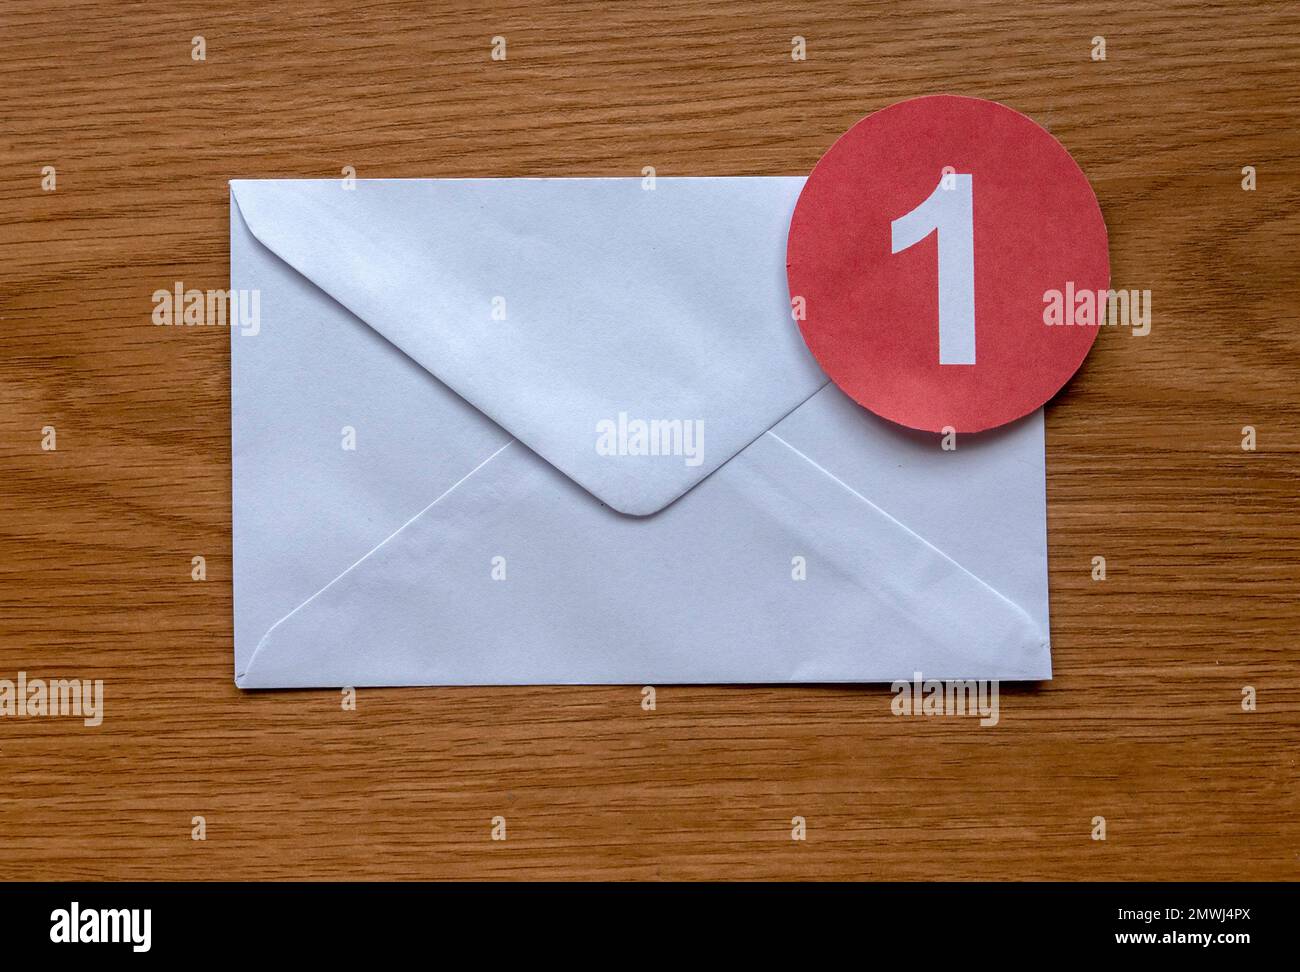 Concept of new email reminder or message alert. A white envelope with a red symbol of notification on a wooden background. Stock Photo